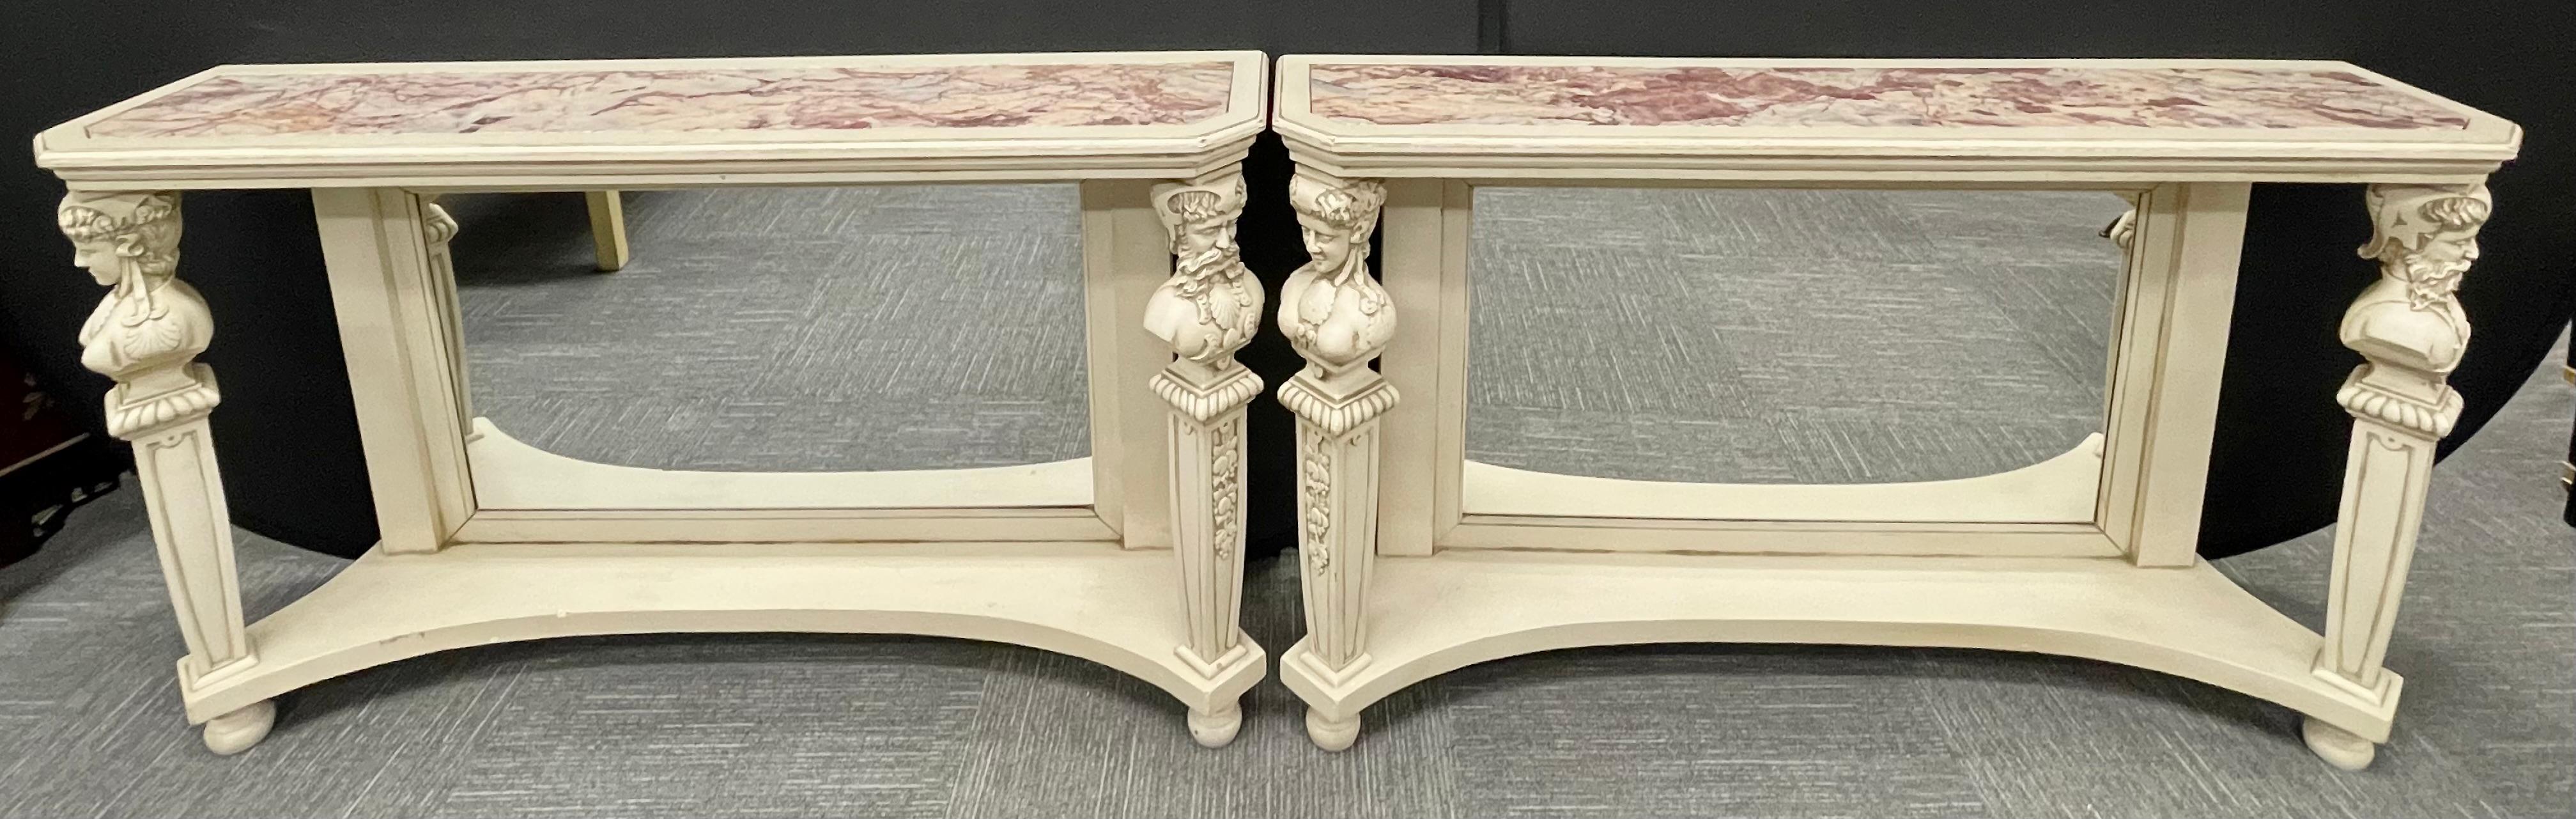 Each distress painted off-white, the oblong marble insert on top, supported on a mirrorred backsplat and two front columns headed on figural motifs, joint with a lower platform, raised on bun feet.